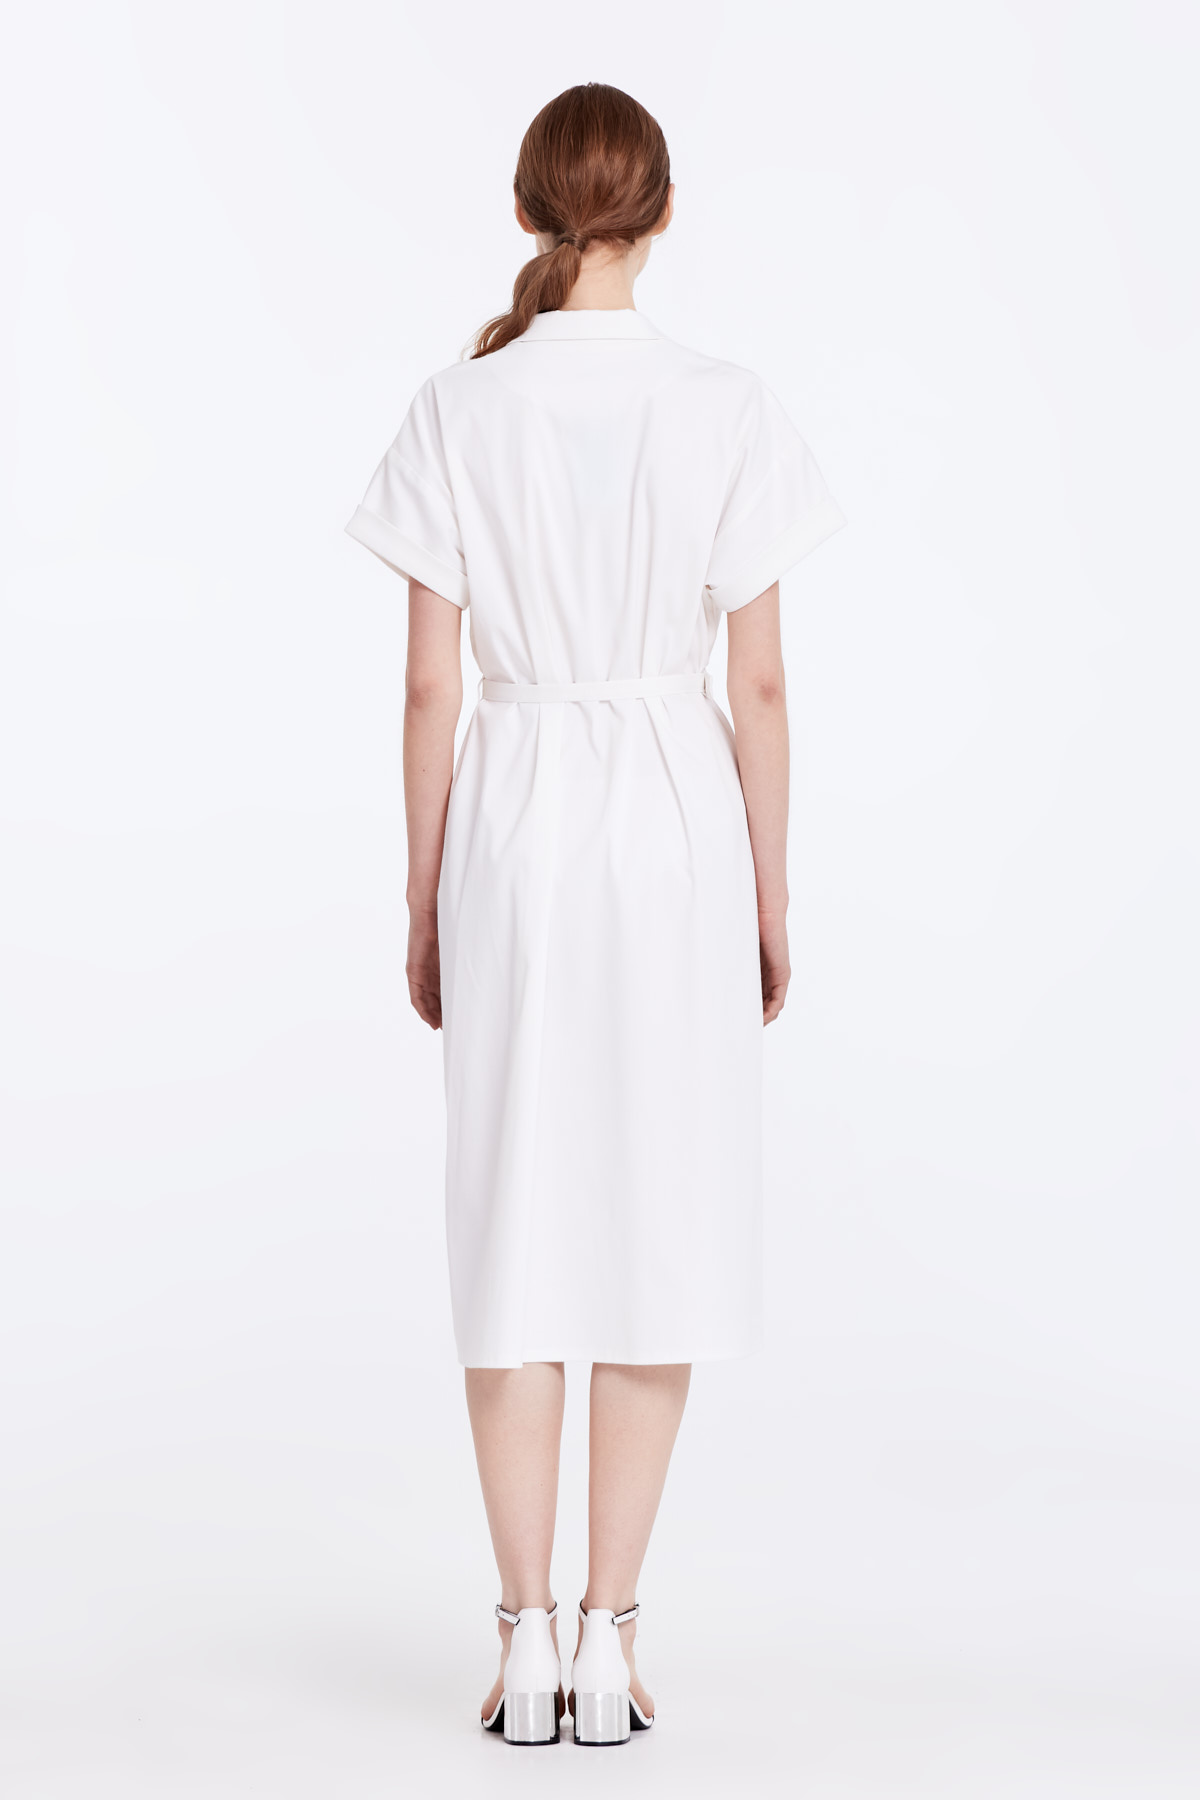 White dress with buttons and a belt , photo 6